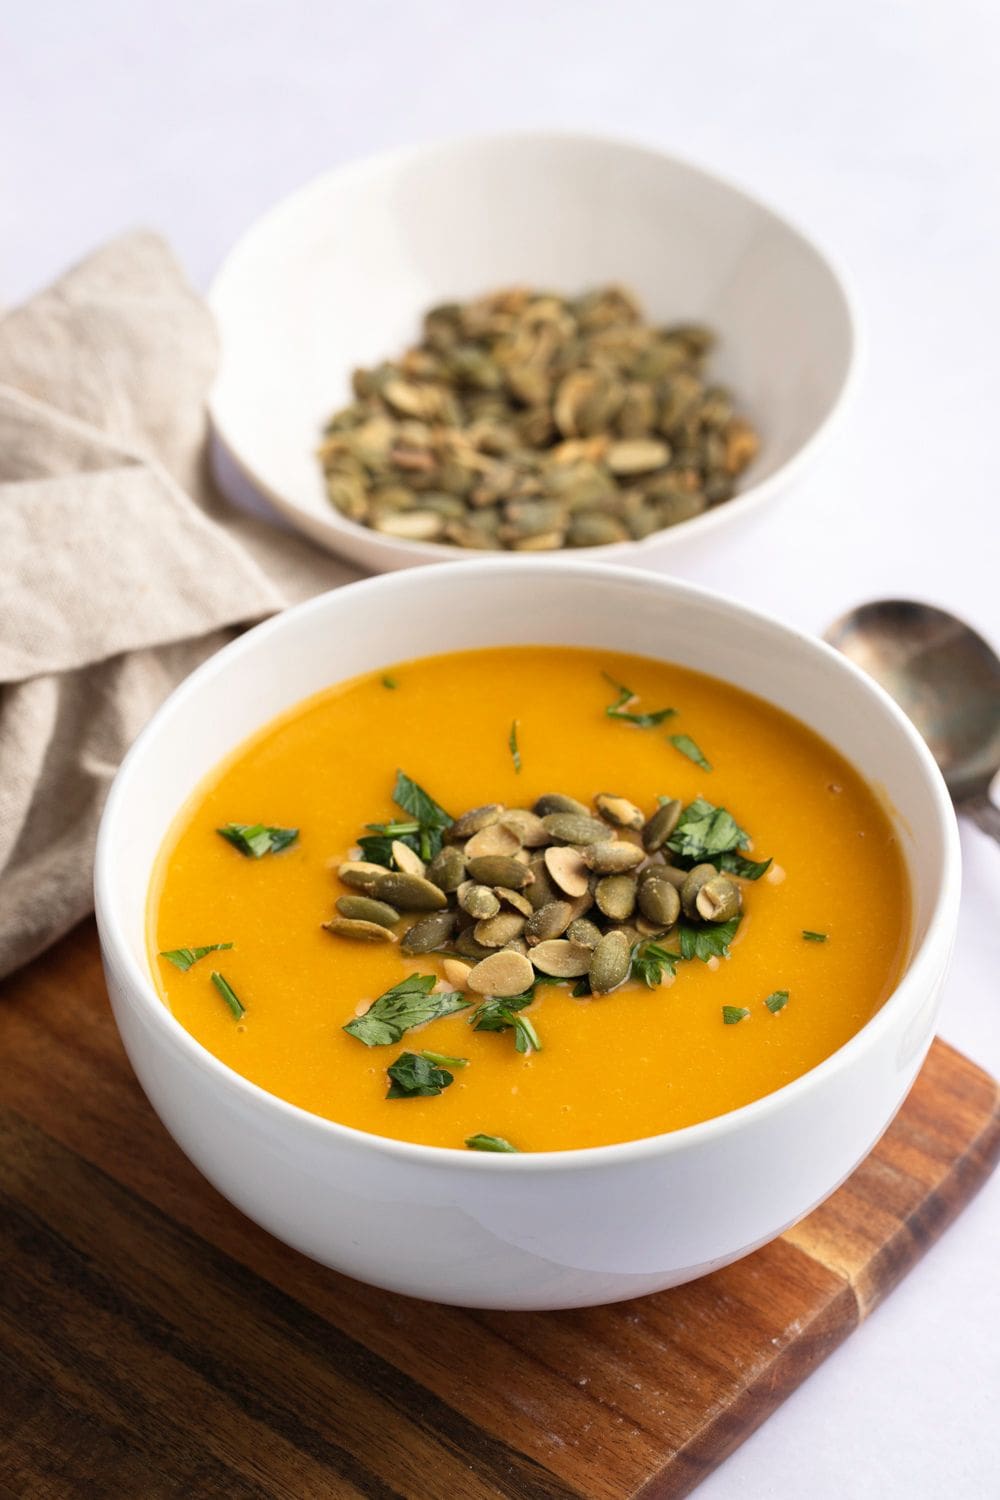 Warm homemade butternut squash soup with butternut squash seeds and herbs.